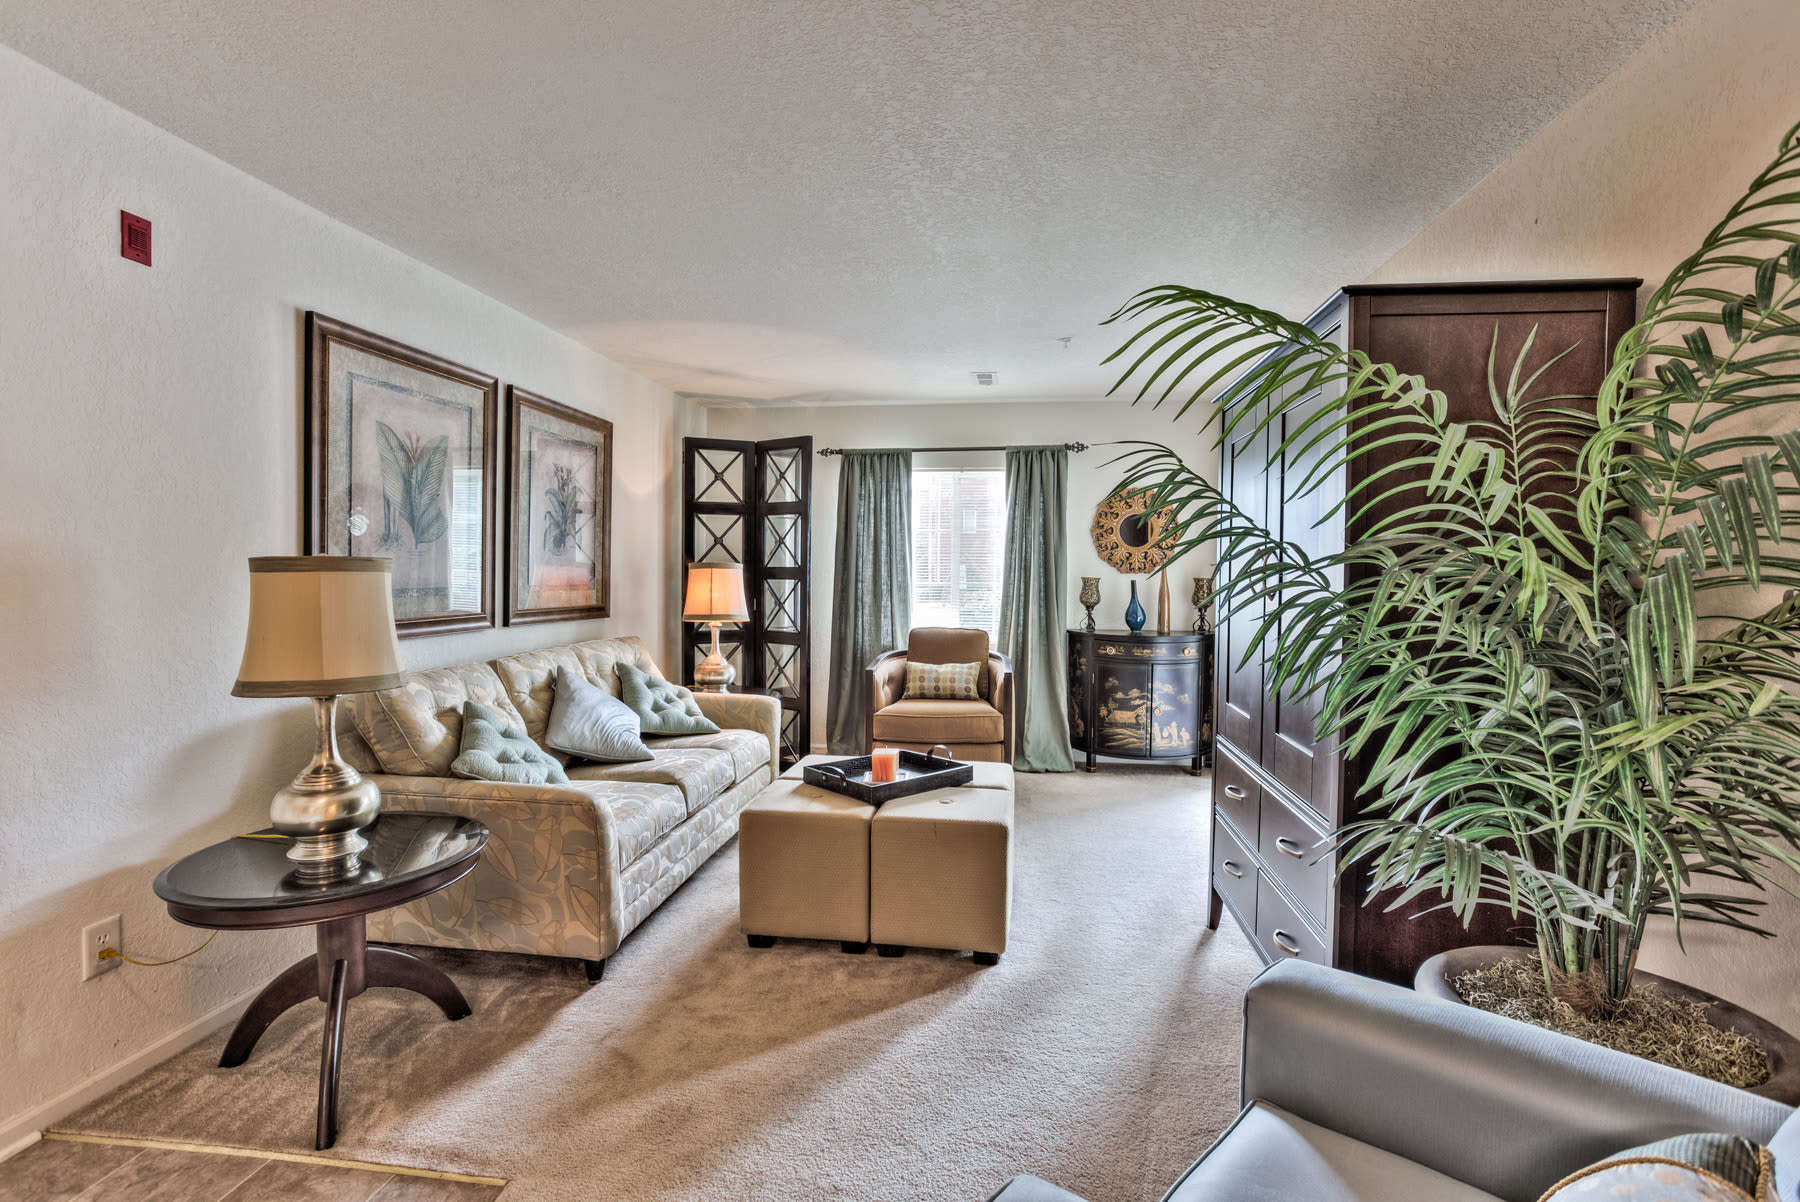 Spacious living area at Copper Mill Village in High Point, North Carolina